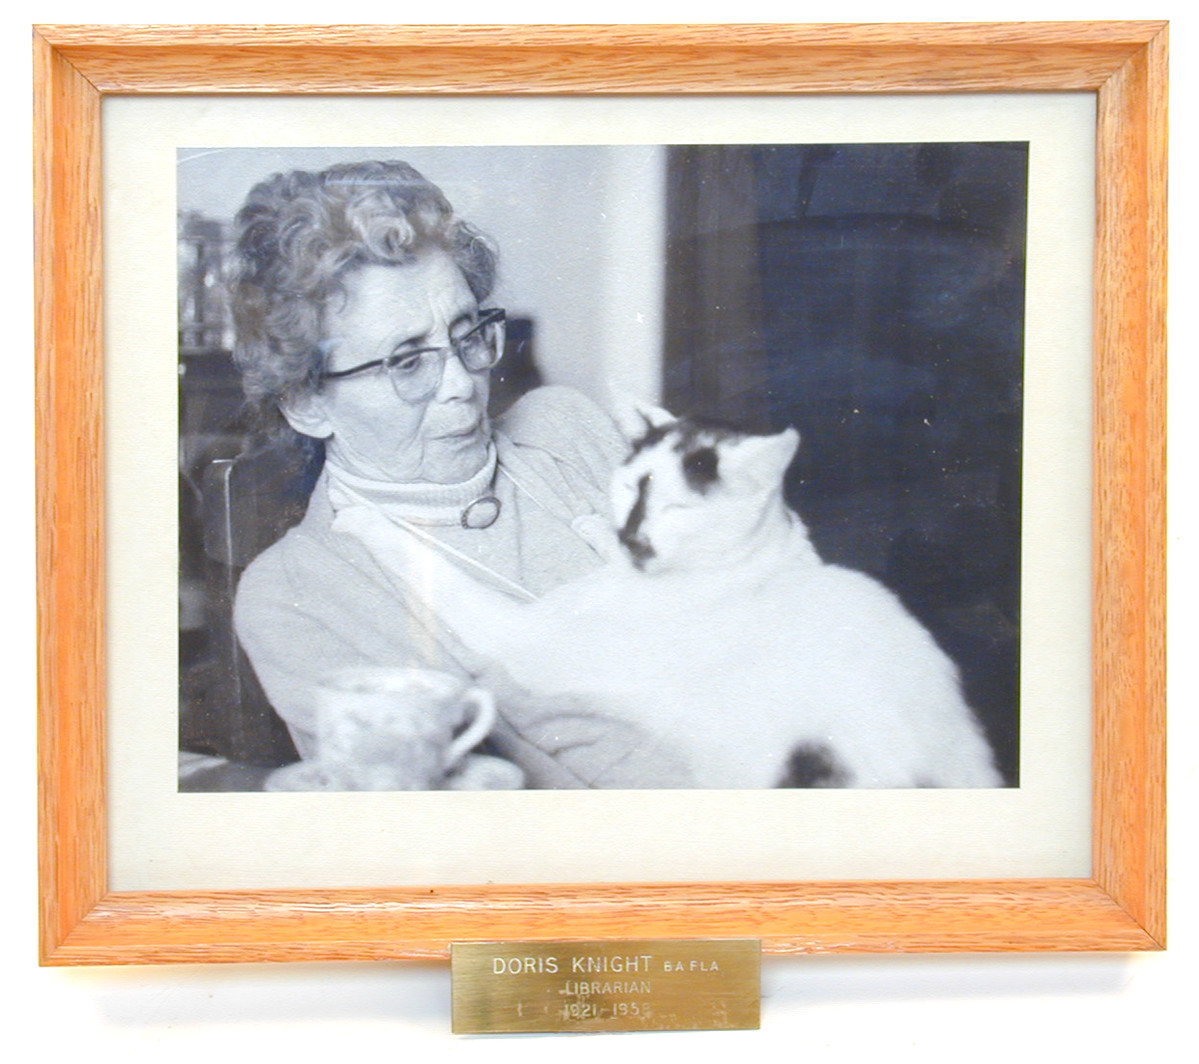 This is a framed photograph of Doris Knight who was a librarian at NIRD from 1921-1958. She is shown with her pet cat. The object is part of the NIRD Collection. (MERL 99/1)